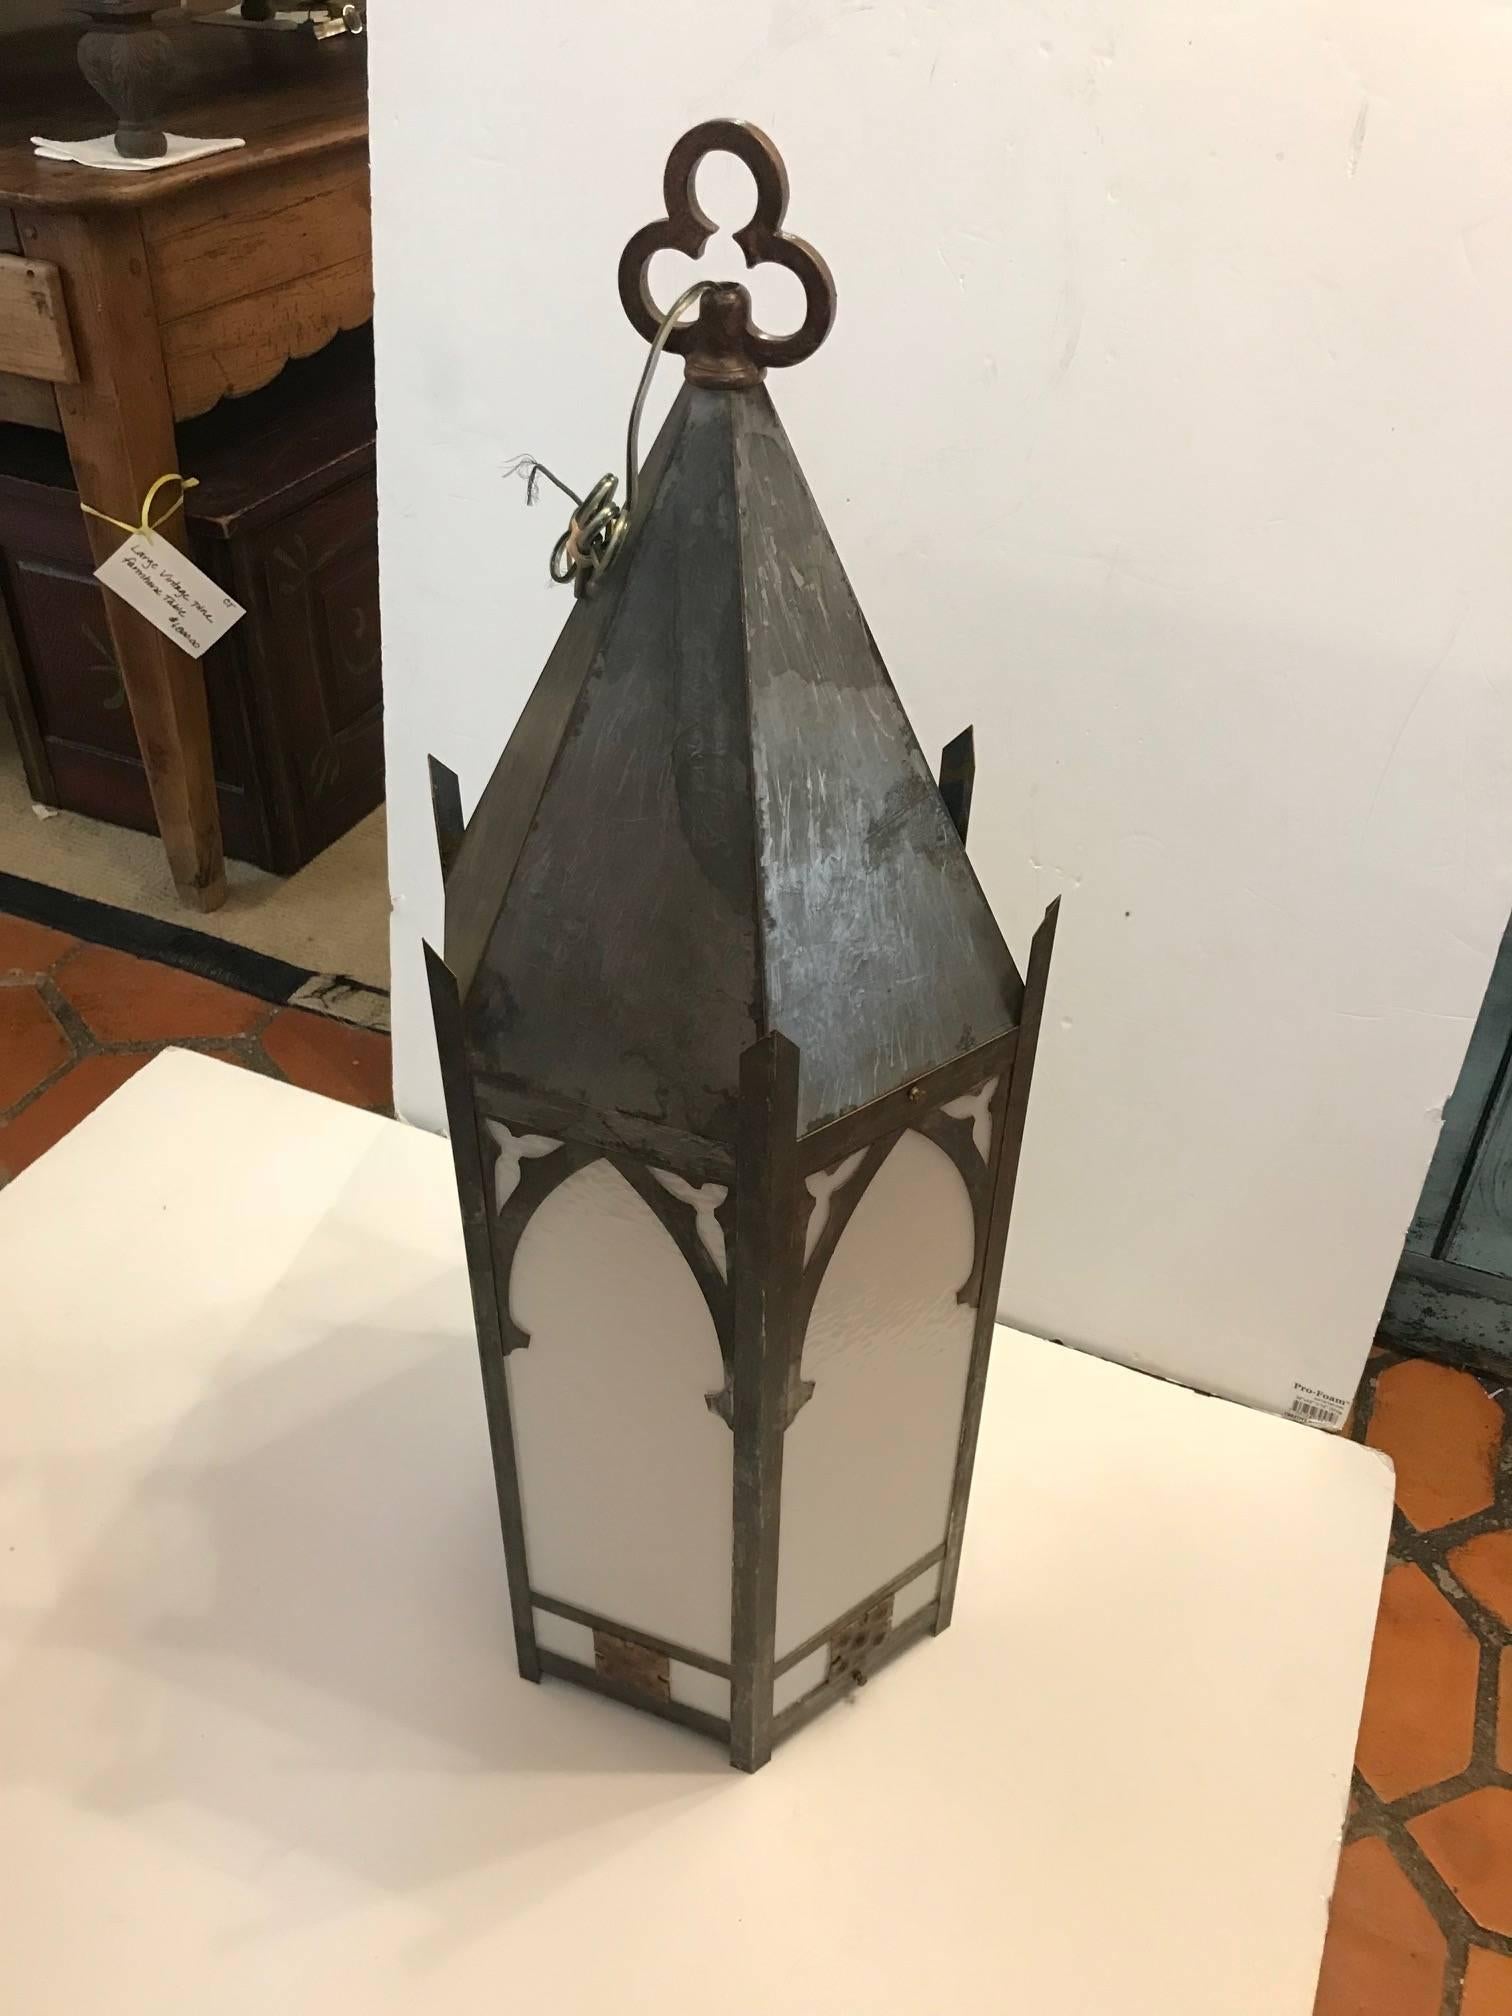 Pair of very impressive in scale, huge galvanized metal lanterns in a Gothic style, having six original glass panels, bottom and steeple top.
Bulb is changed by a side door which opens or at the bottom, single bulb inside, porcelain sockets,